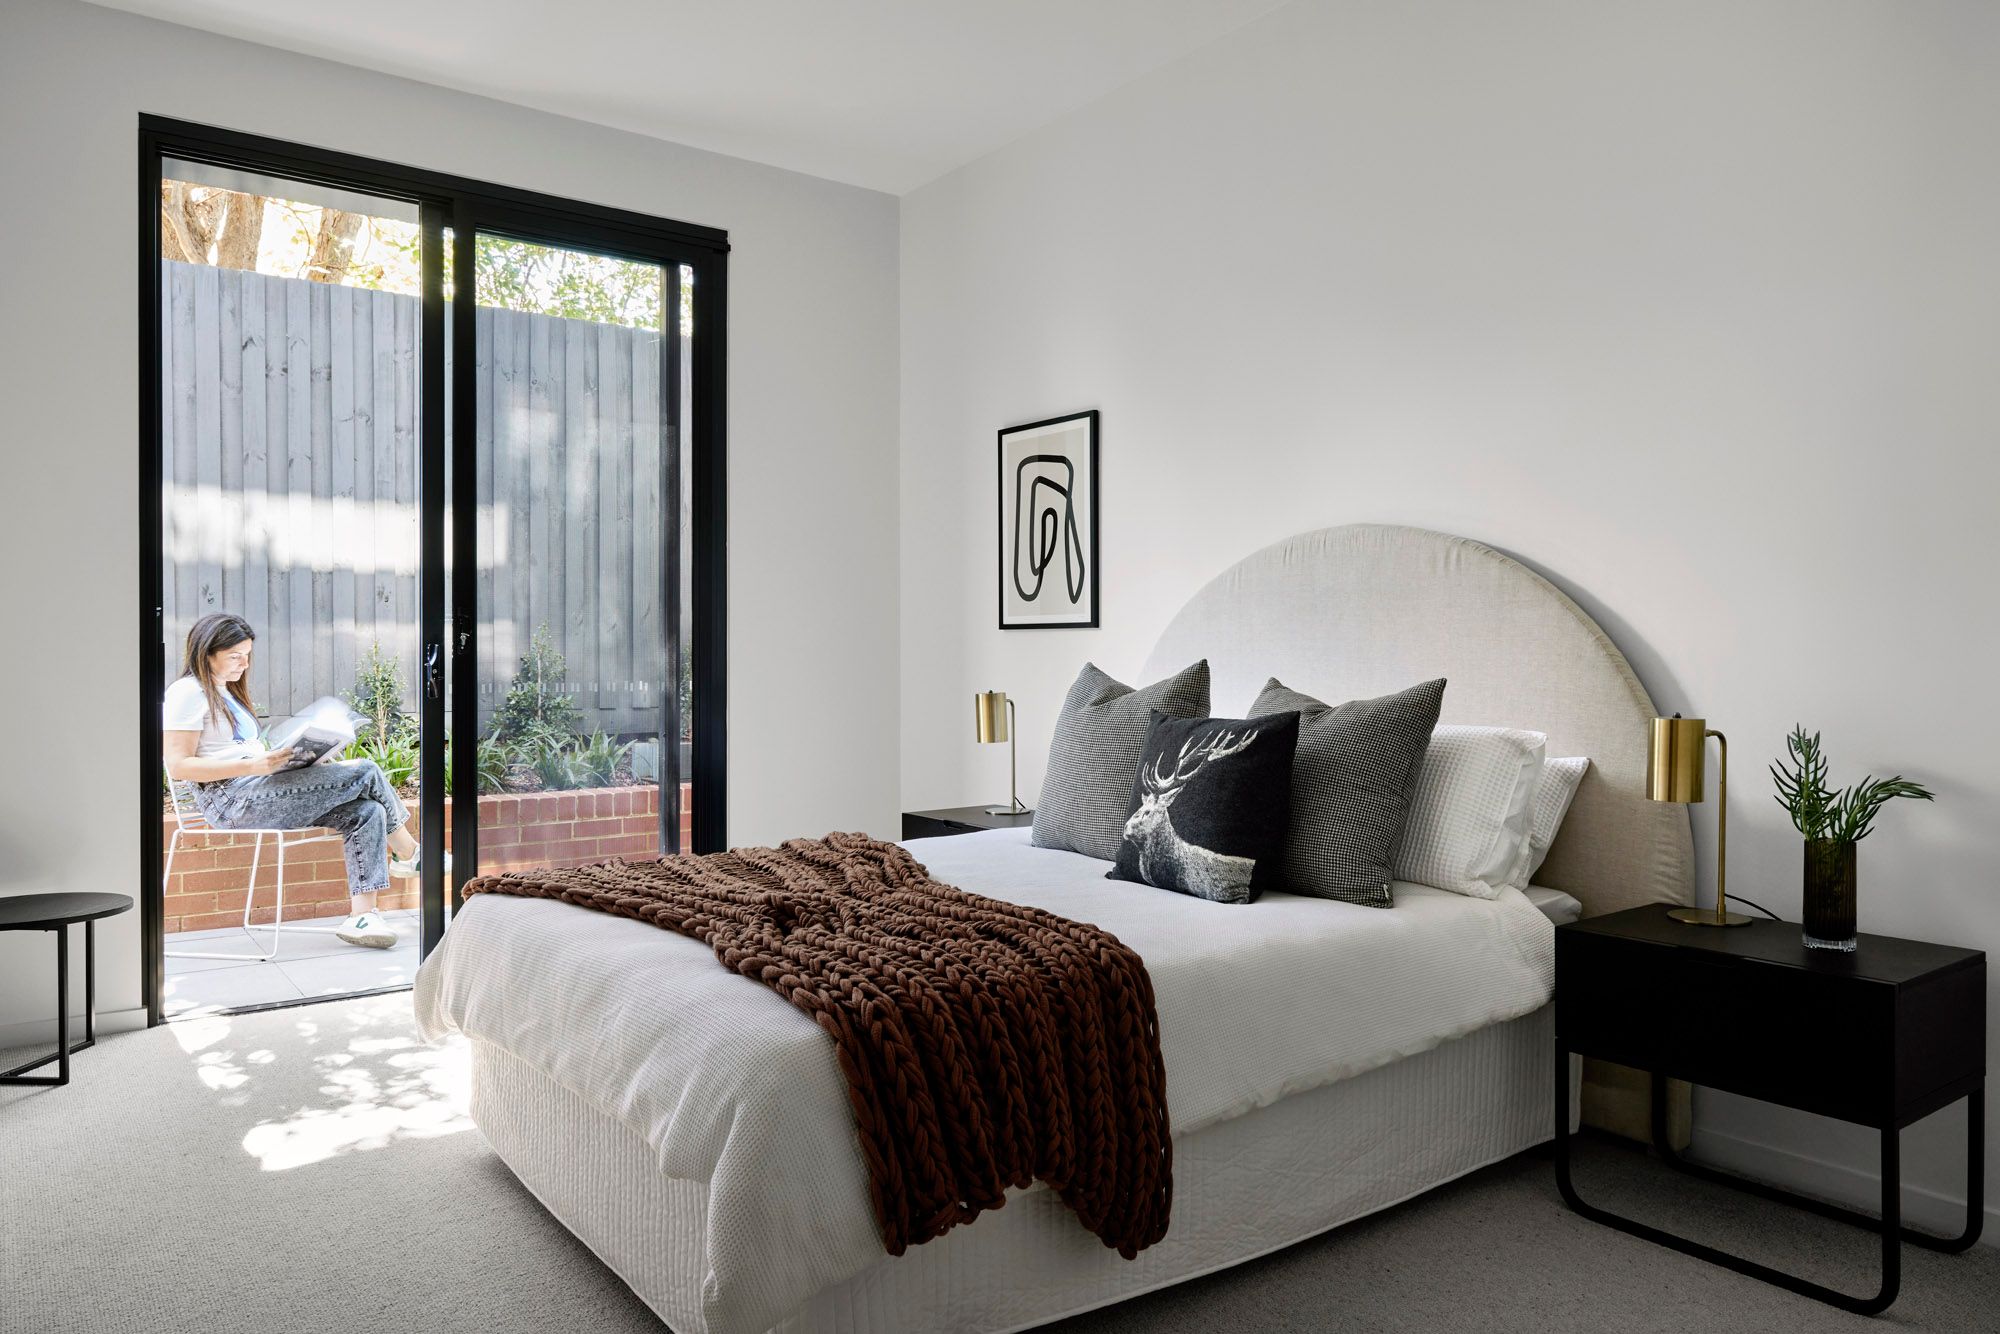 Slate House by Austin Maynard Architects. Master bedroom view, with connecting courtyard terrace